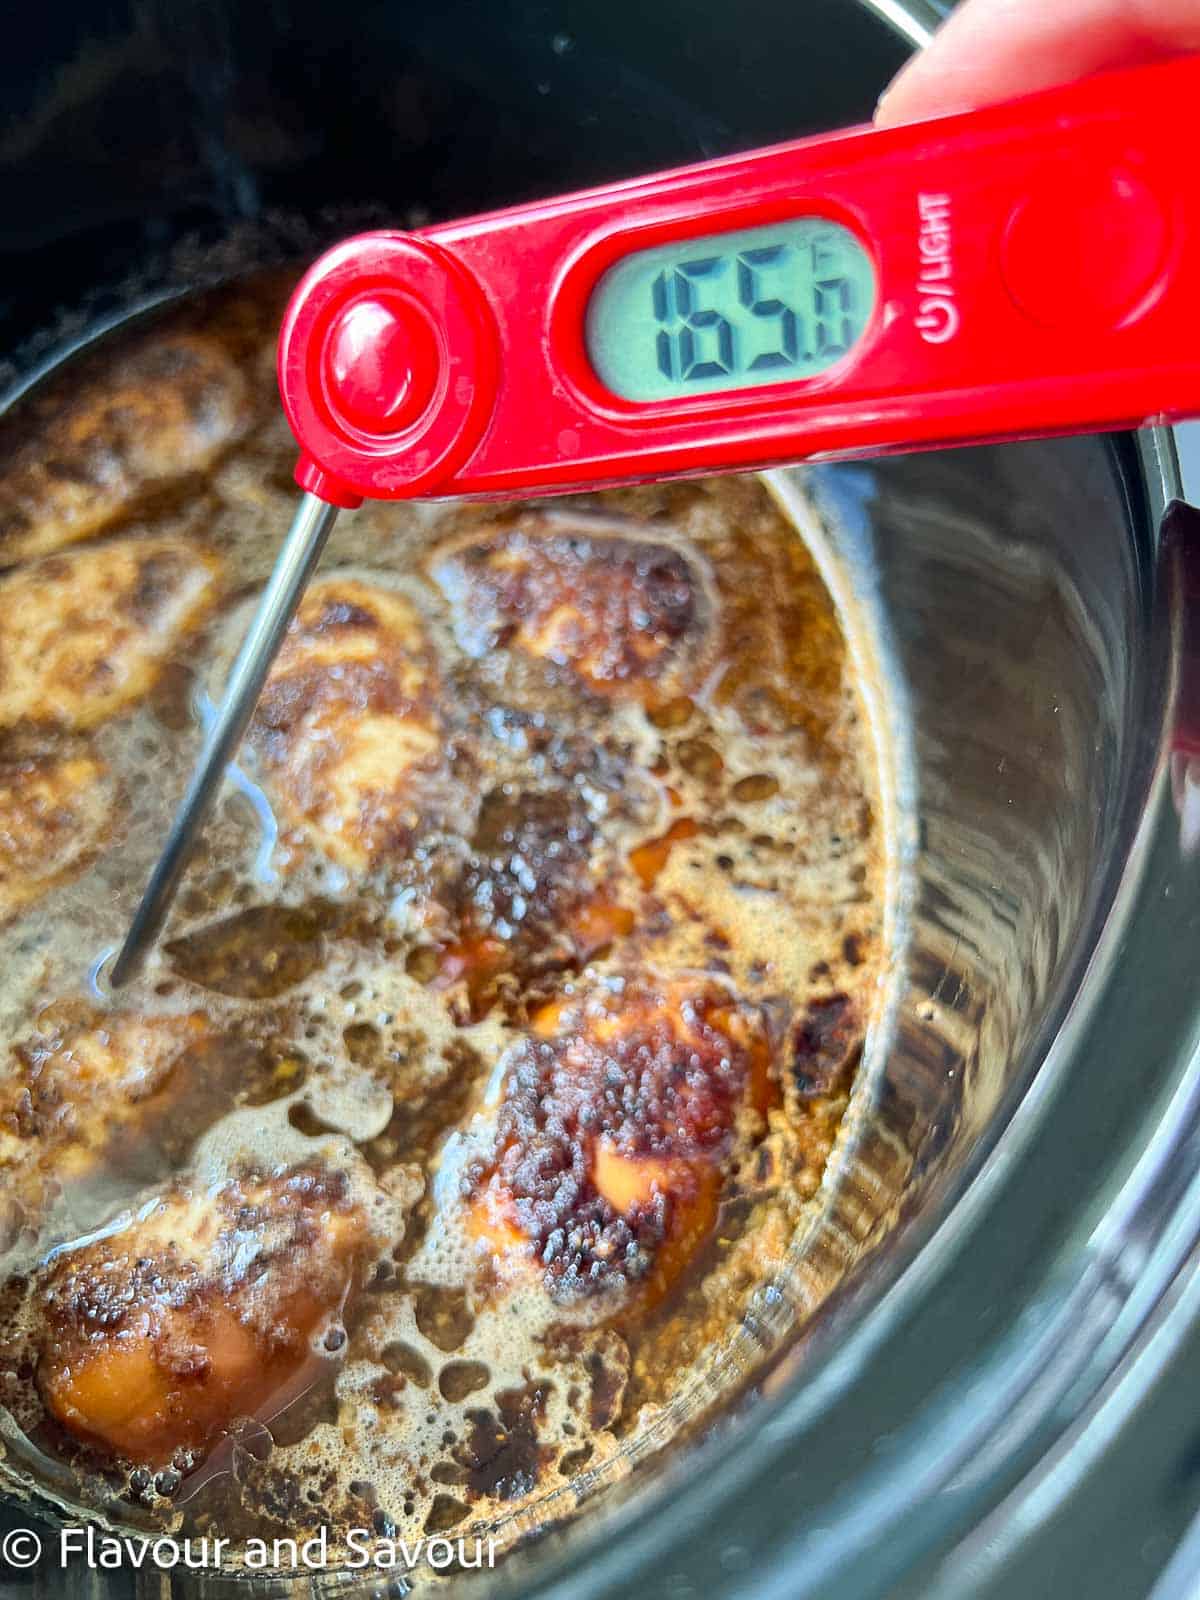 A meat thermometer showing 165°F.